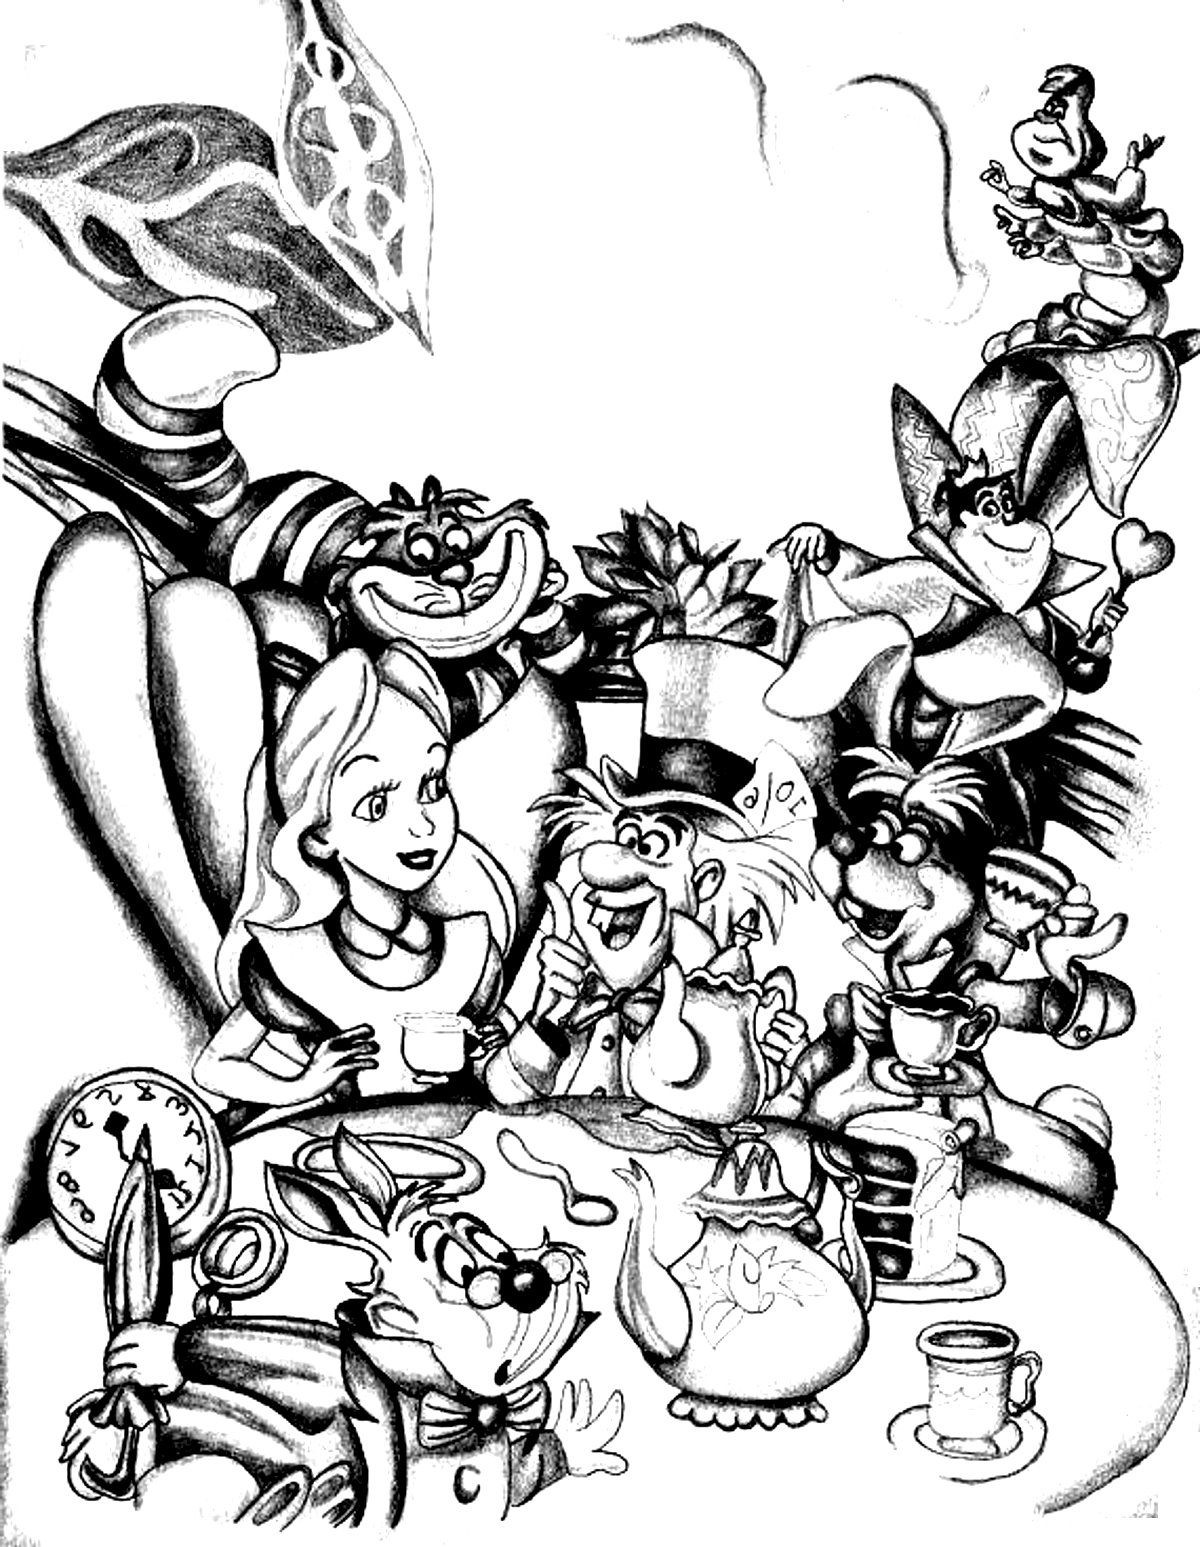 Various characters from Alice in Wonderland (Disney). It features Alice, the Mad Hatter and the March Hare, as well as the Cheshire Cat, the Queen of Hearts and the King of Hearts.